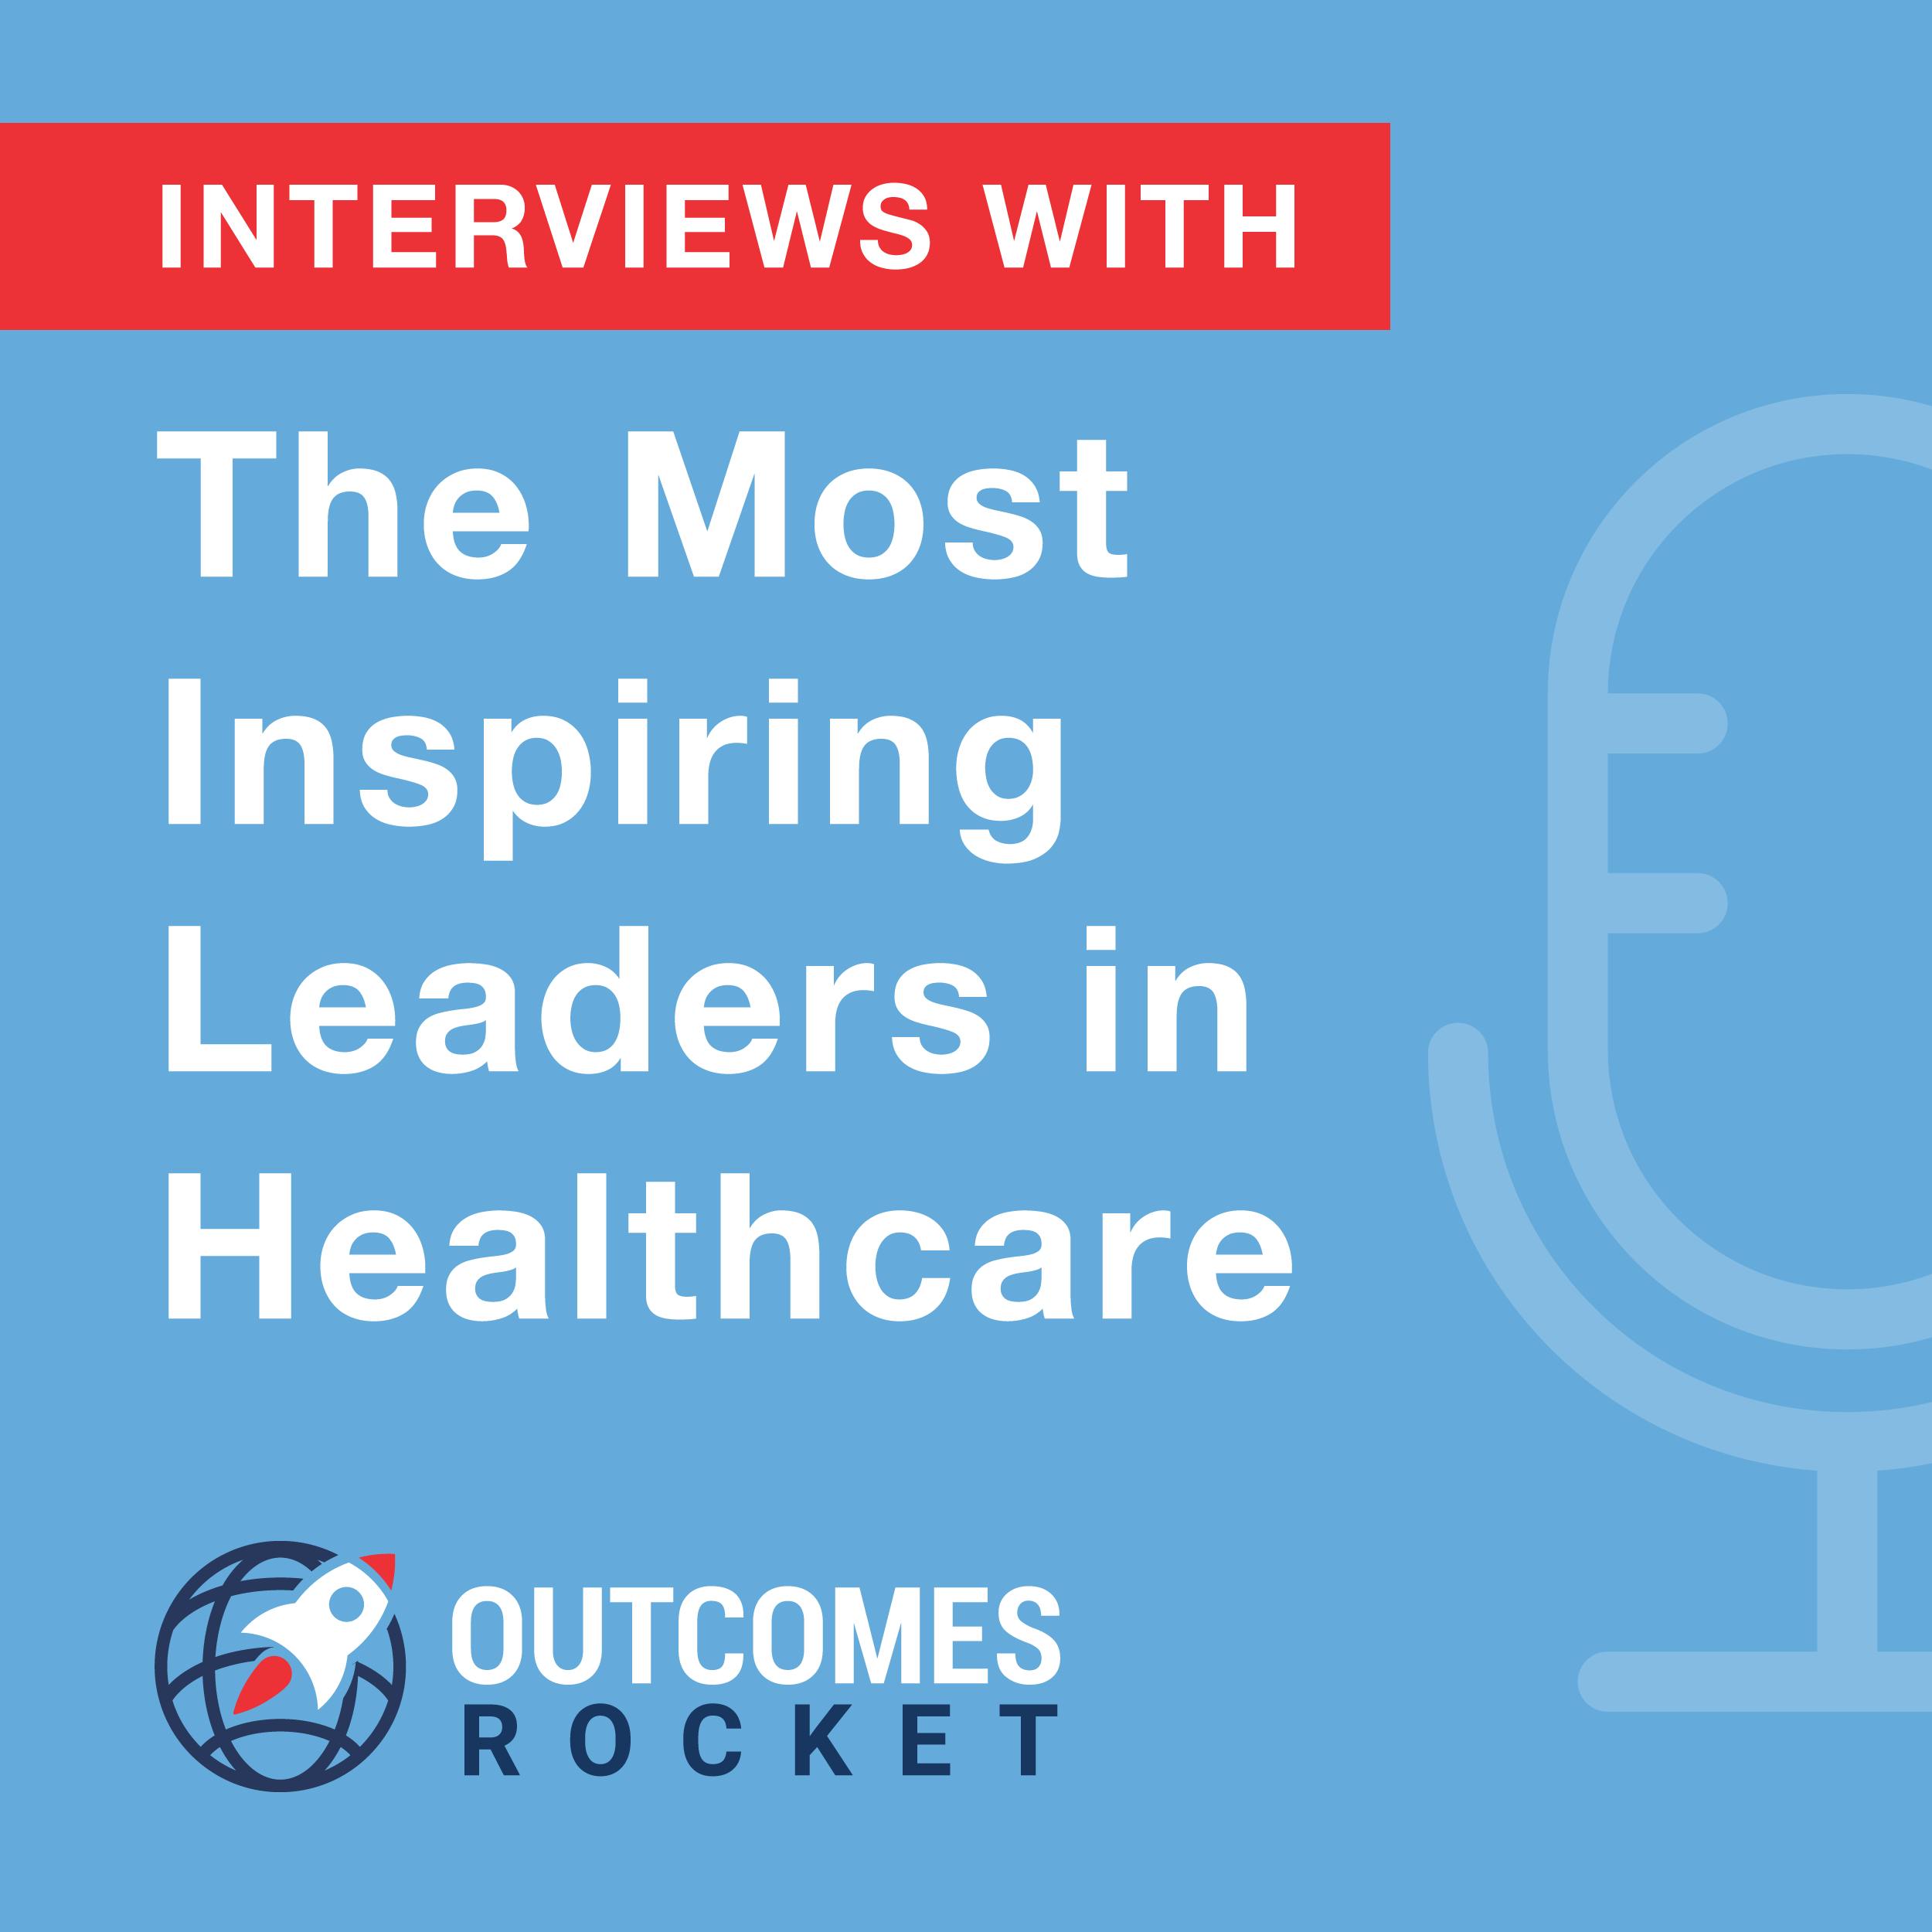 A Glimpse into the Work at HealthLeaders with Chris Cheney, Senior Clinical Care Editor at HealthLeaders Media